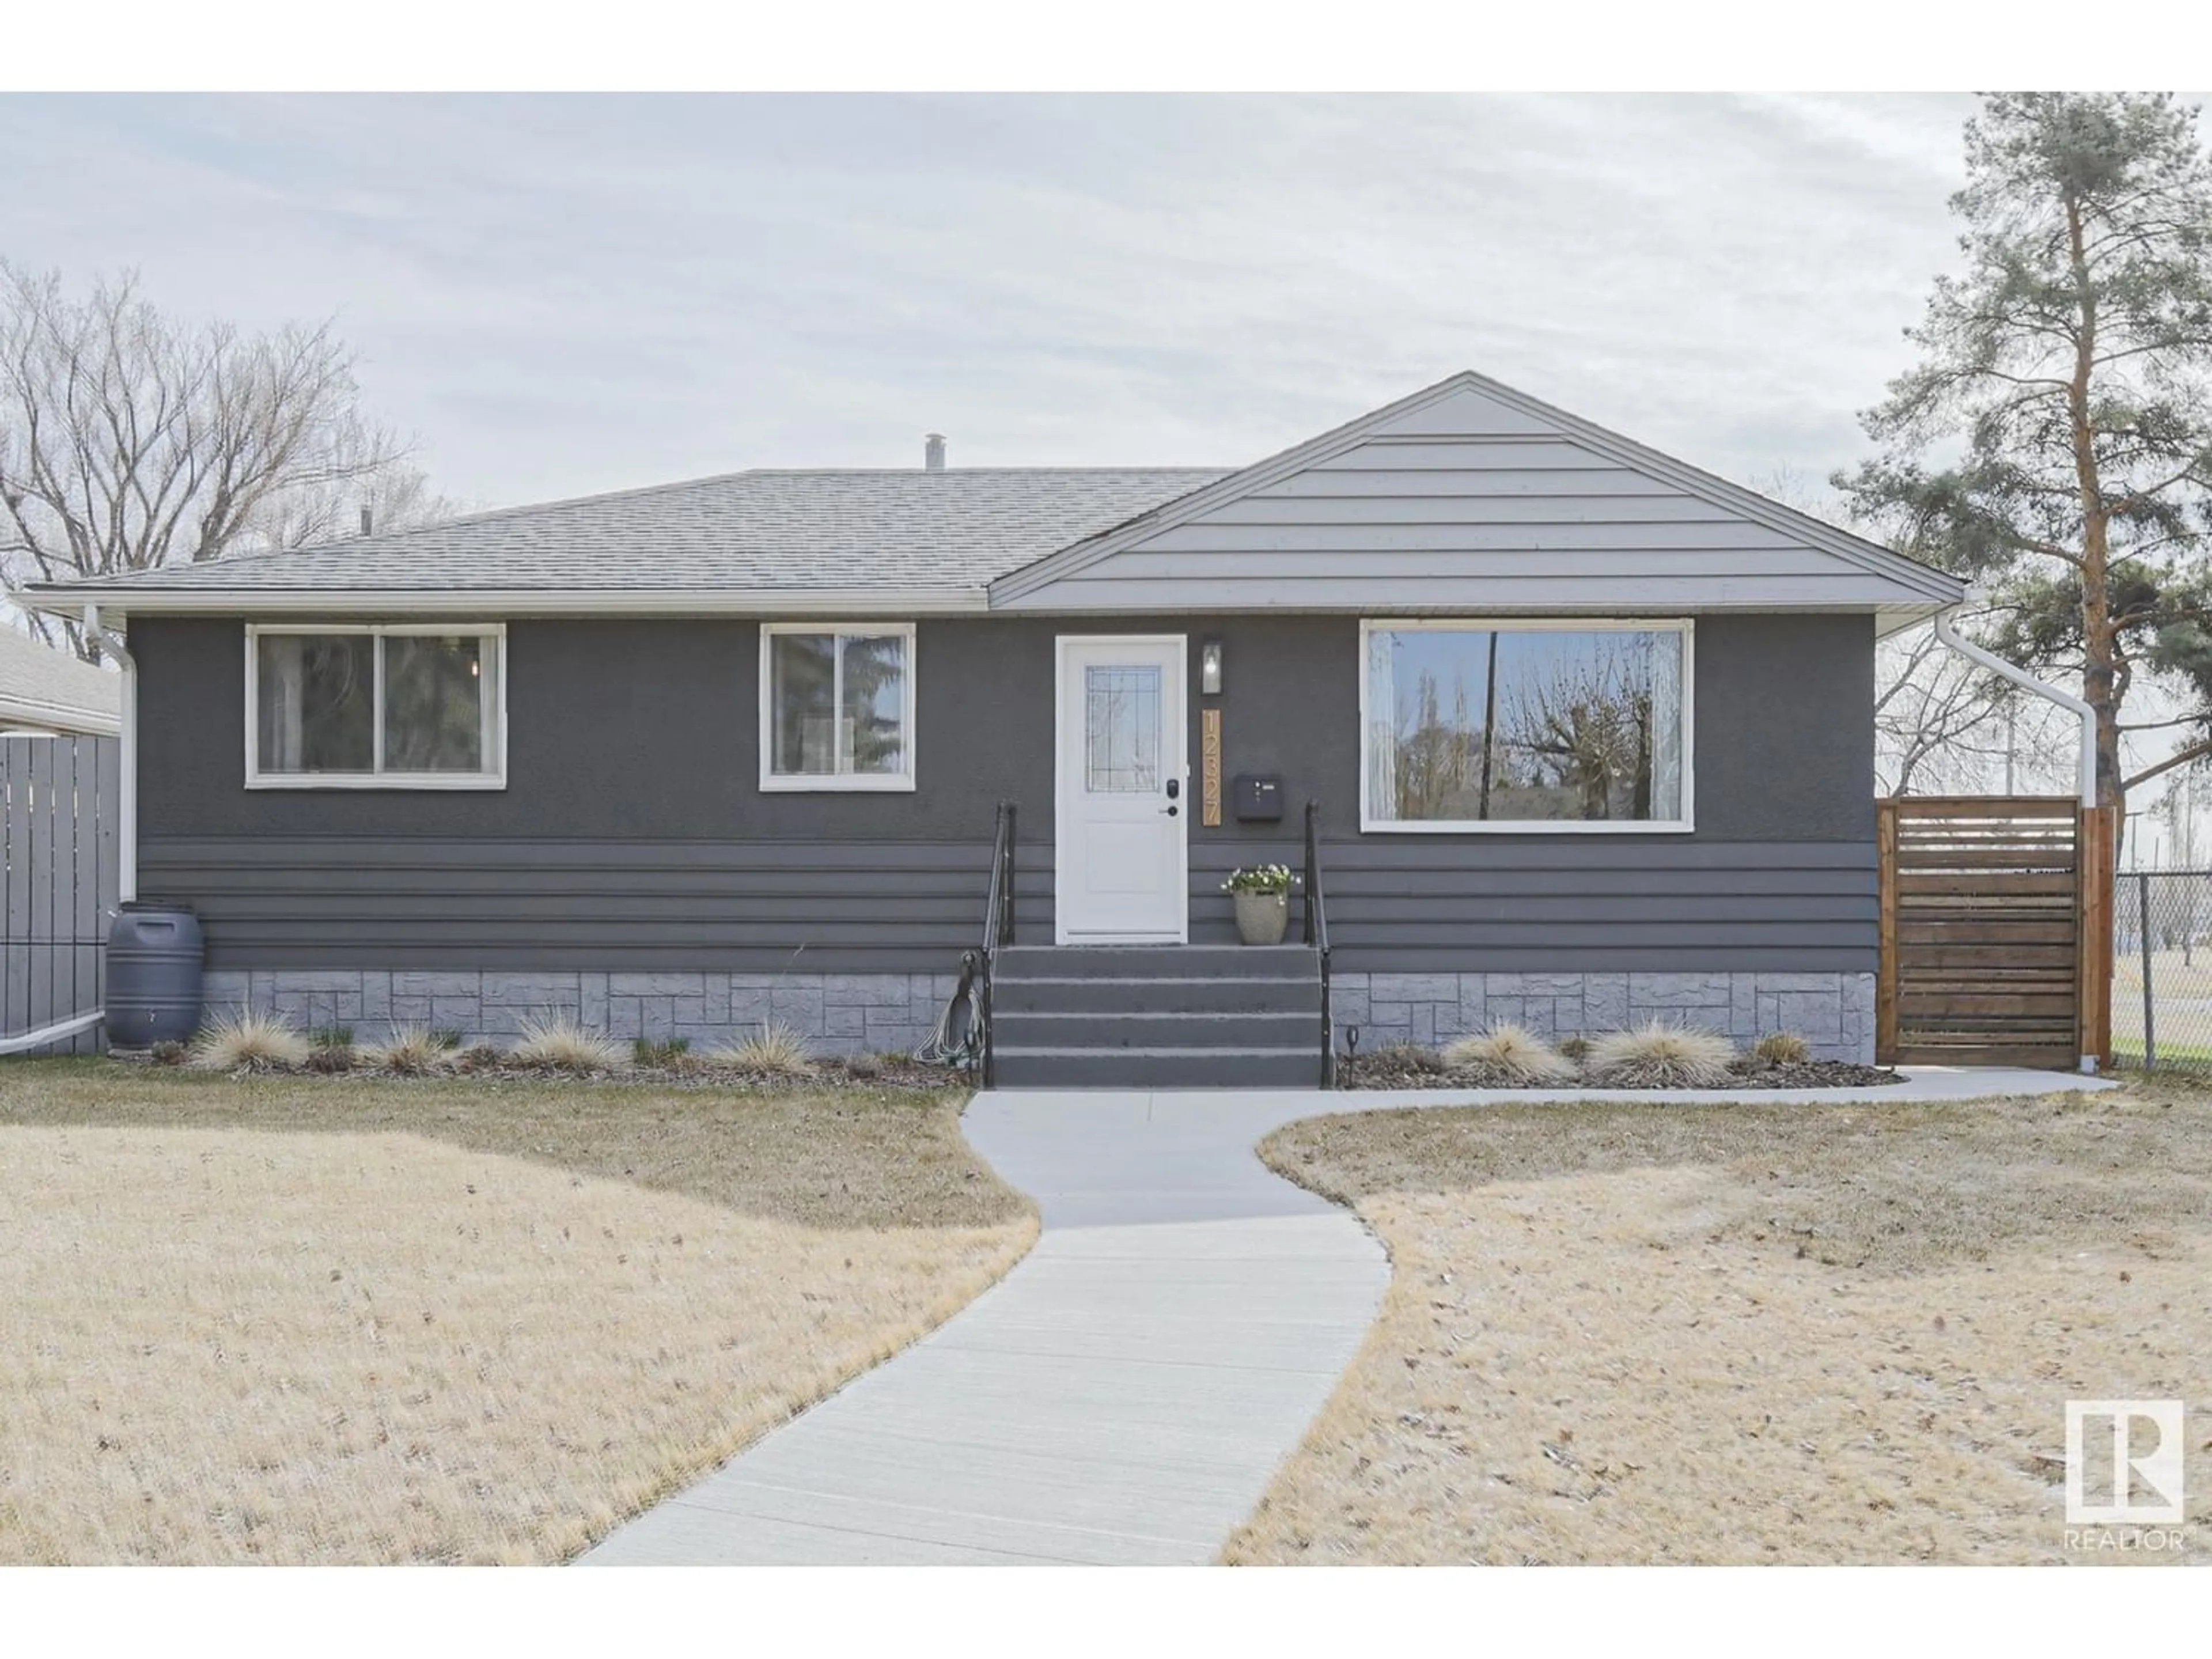 Home with vinyl exterior material for 12327 140 ST NW, Edmonton Alberta T5L2C9